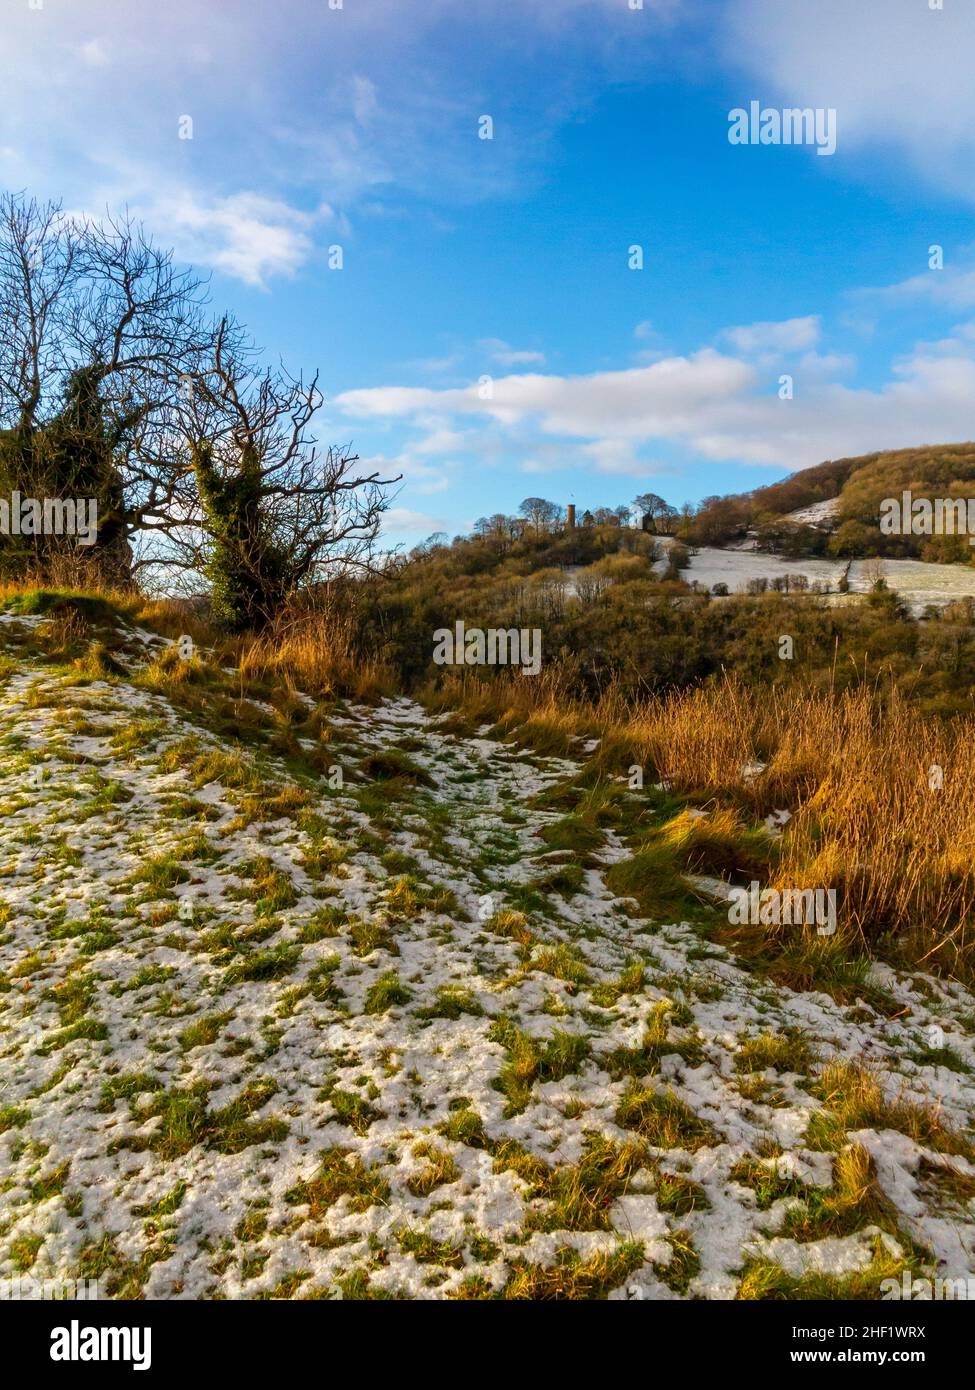 Snow covered landscape with trees at High Tor in Matlock Bath in the Derbyshire Peak District England UK with Masson Hill visible in the distance. Stock Photo